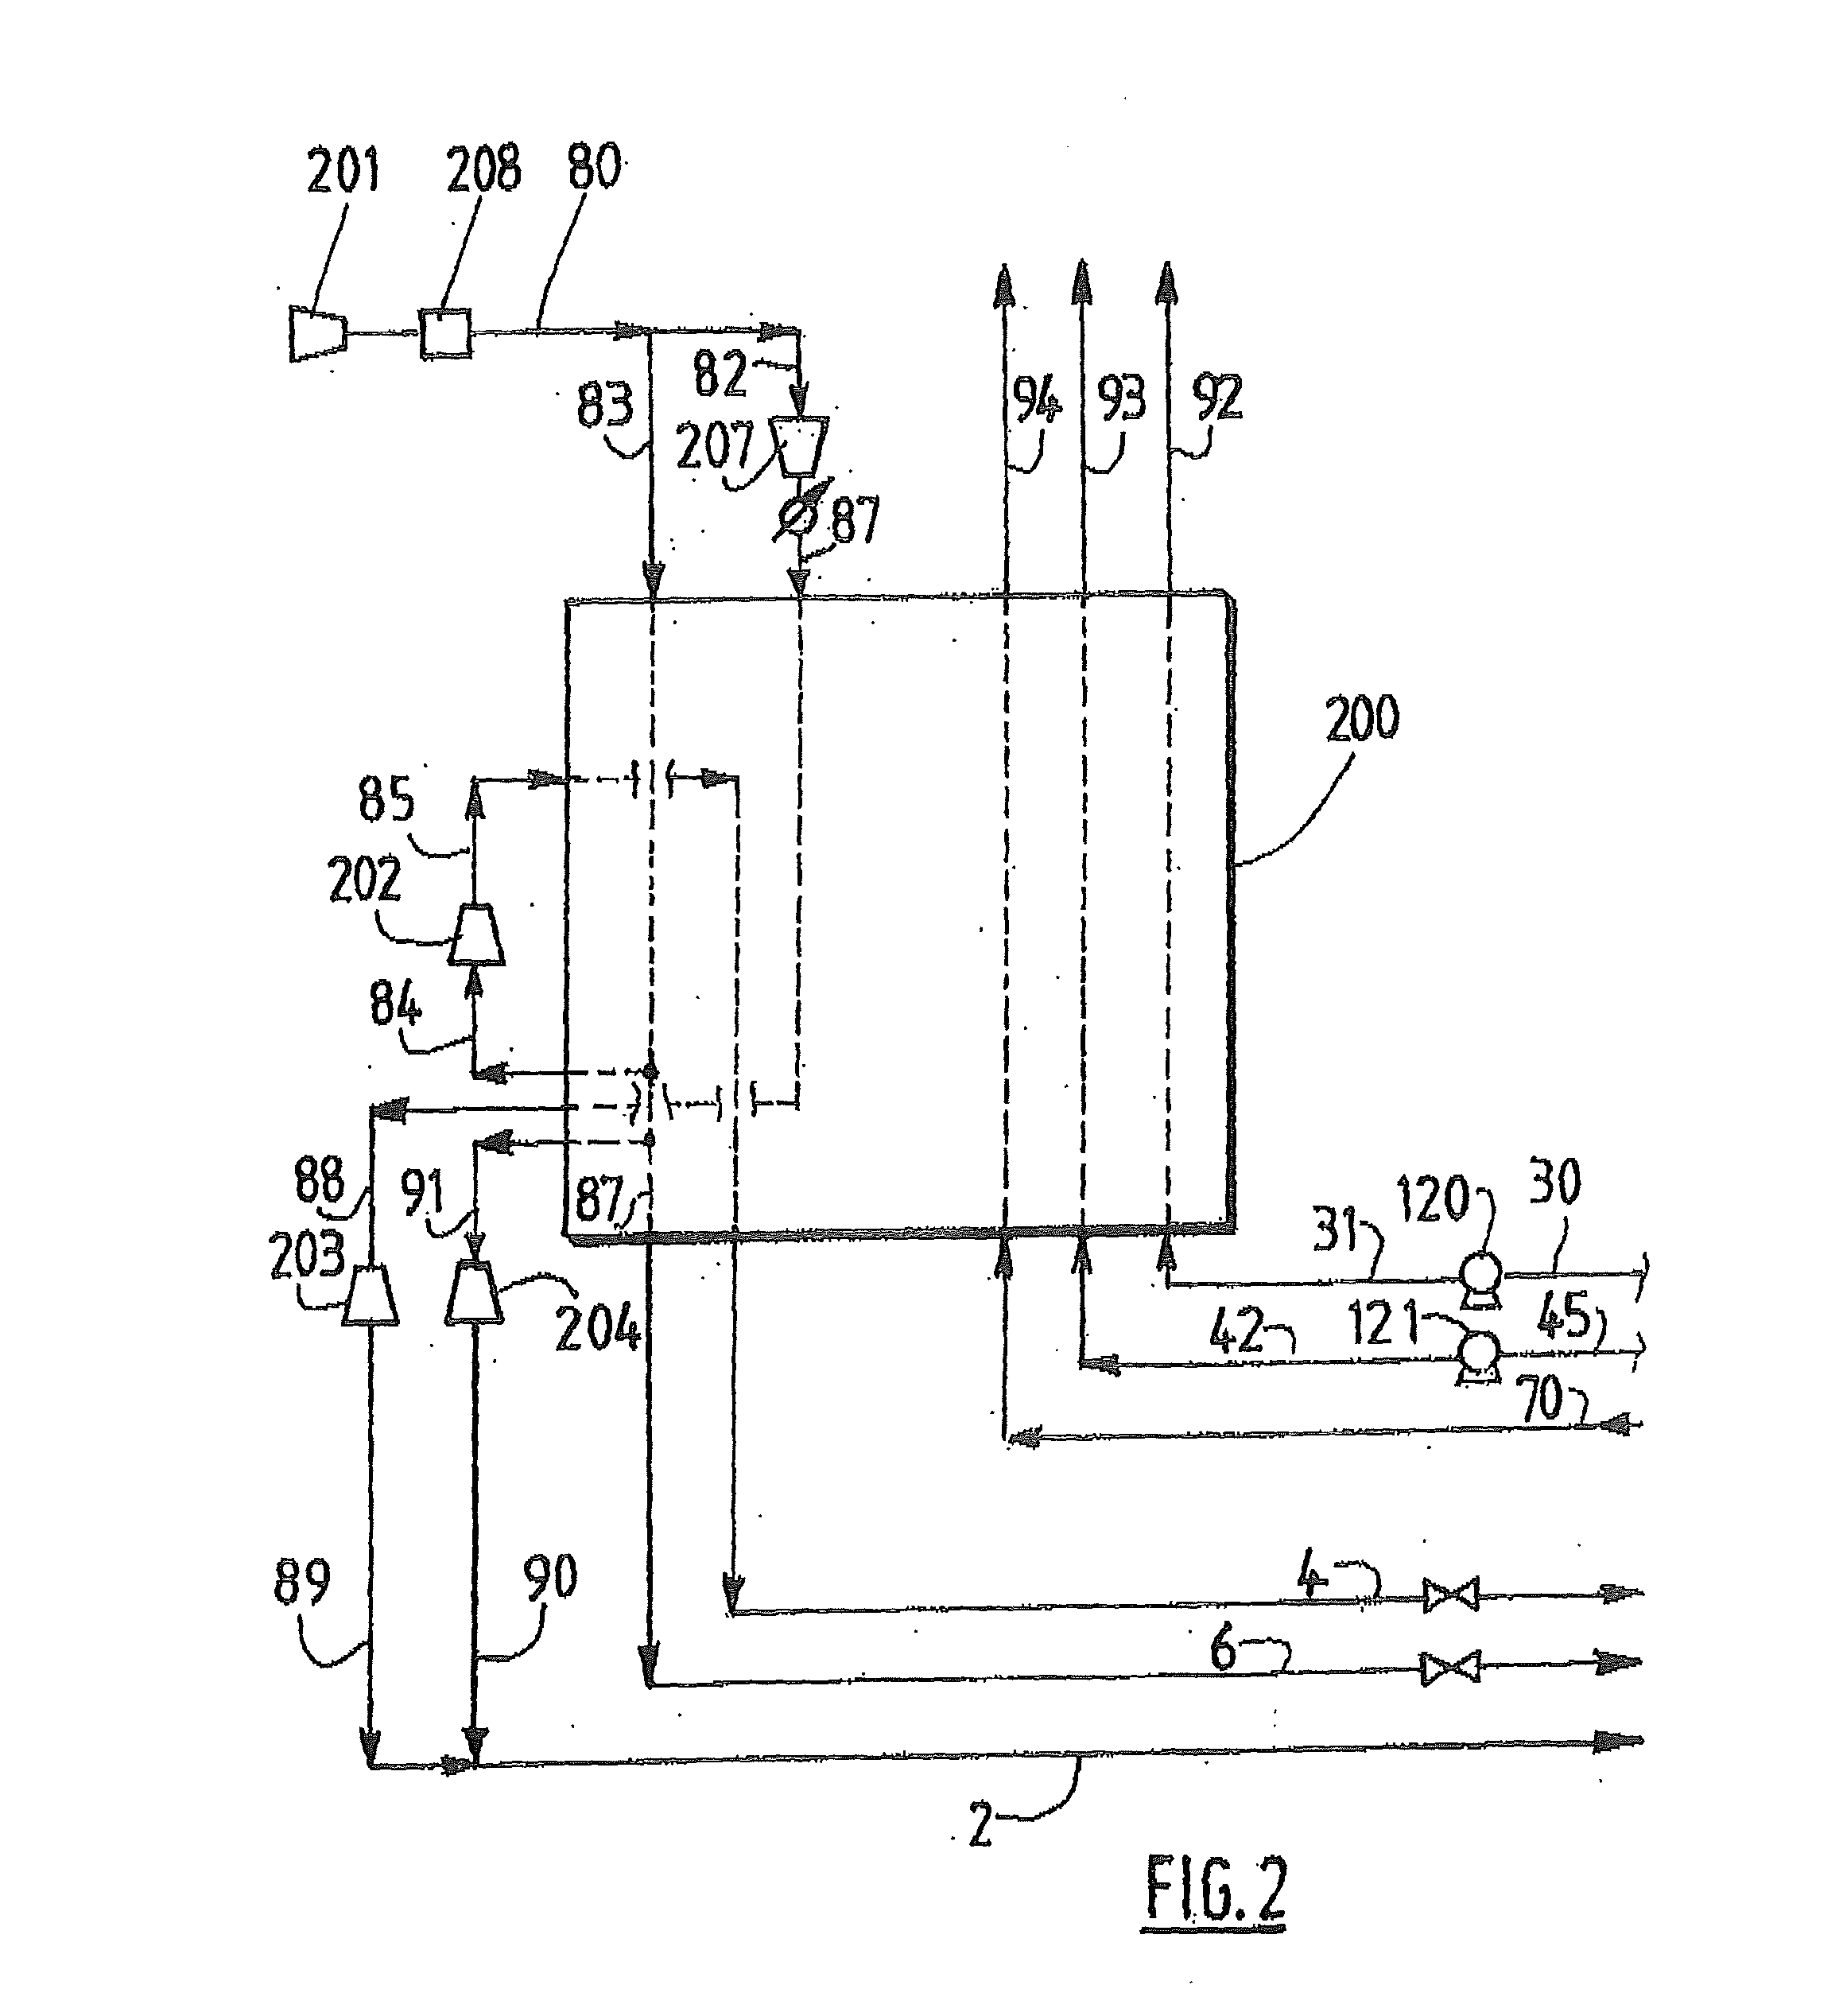 Process And Apparatus For The Separation Of Air By Cryogenic Distillation